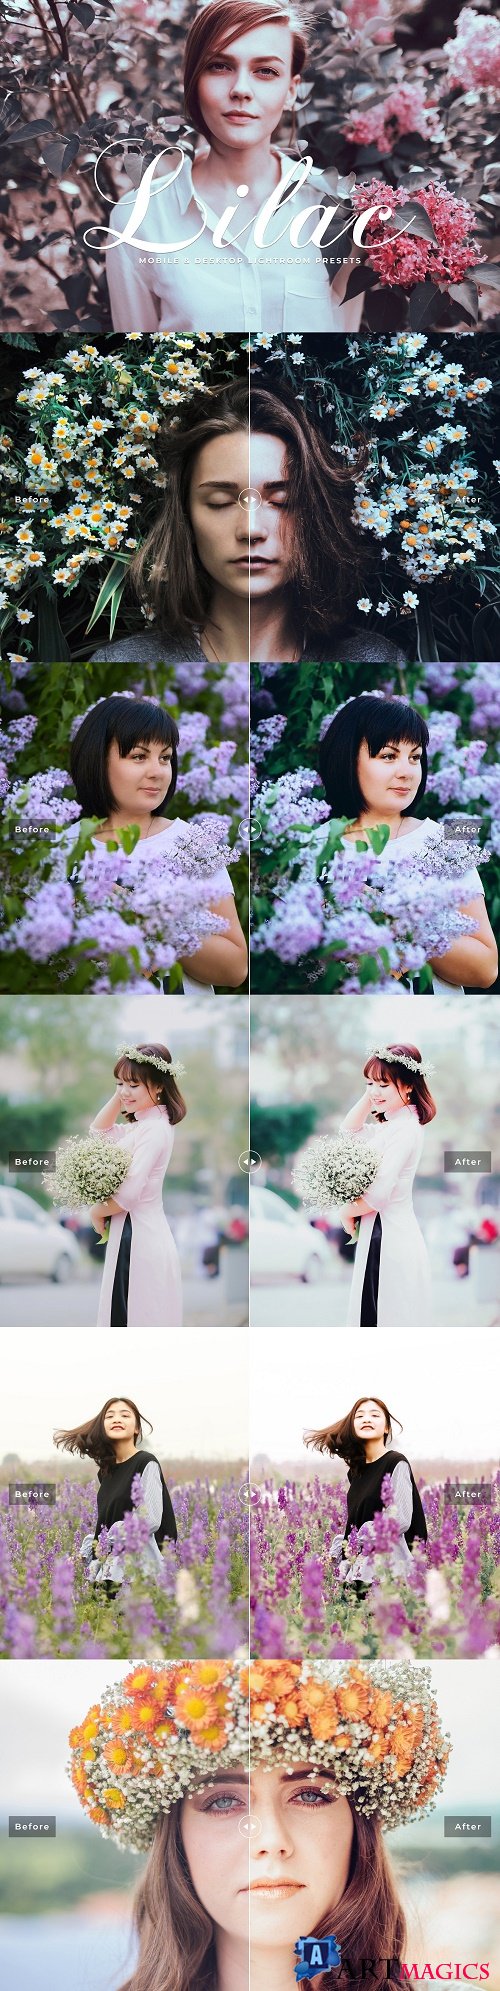 Lilac Lightroom Presets Collection - 3850785